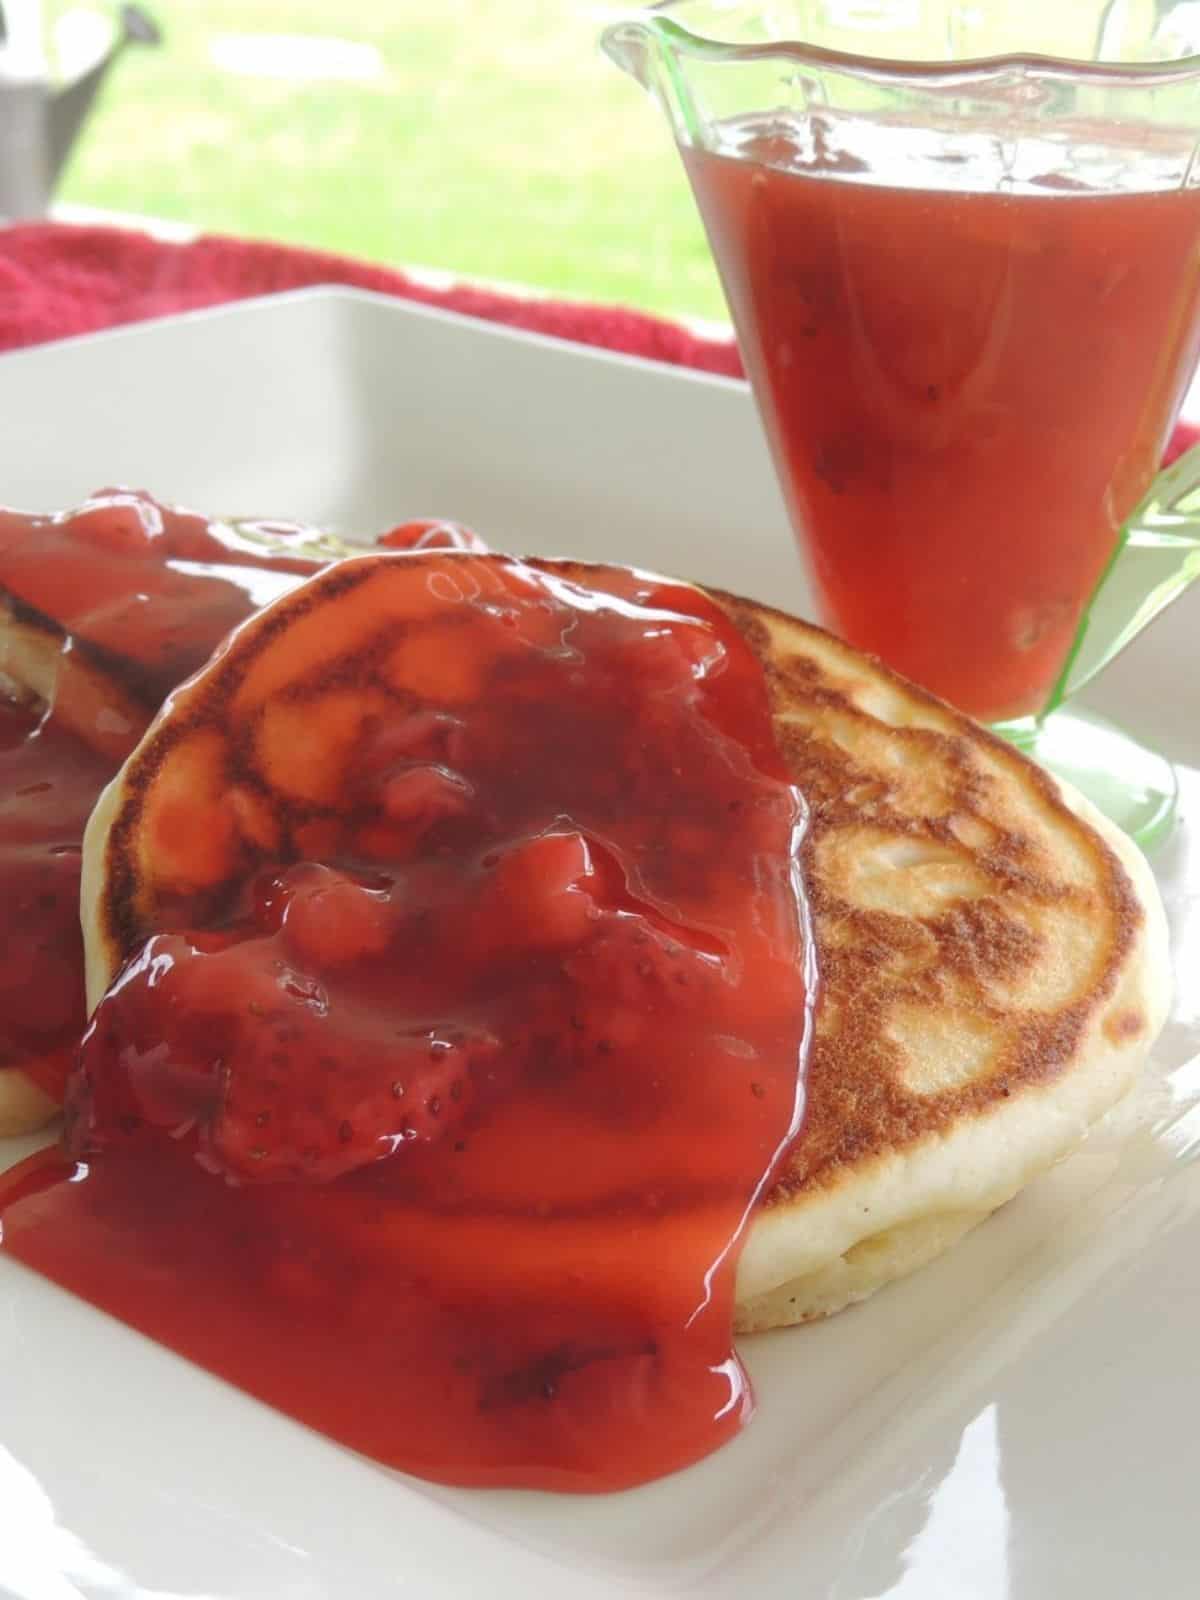 pancakes on plate with strawberry sauce on top.